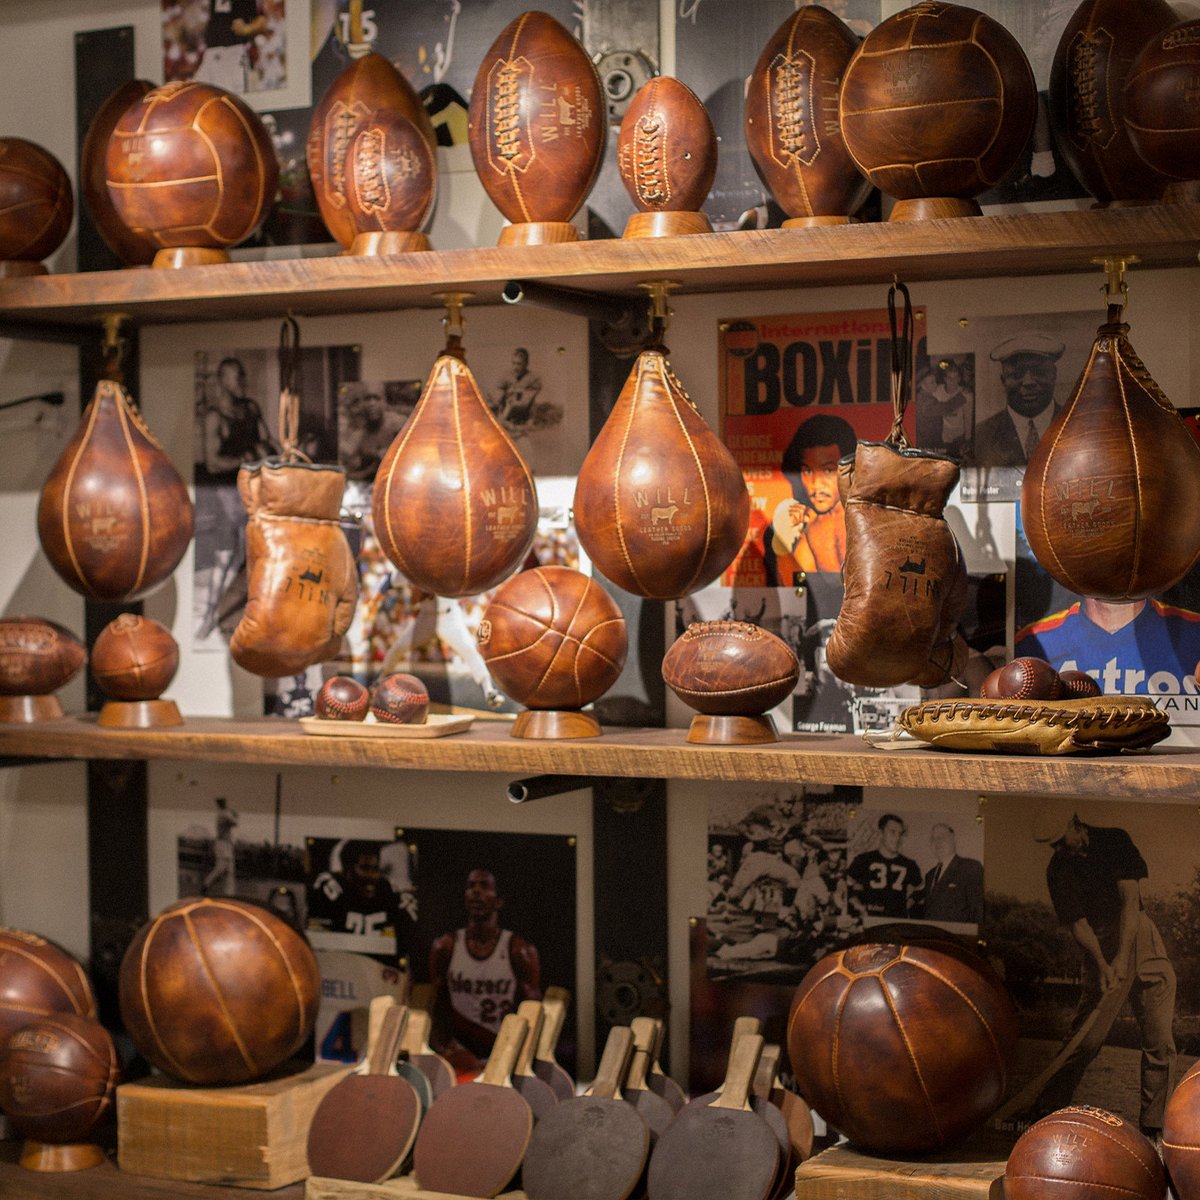 #TBT The 'Leather Sports Wall' in our Austin store, back in February of 2017. We're thinking of bringing back this collection.  What do you guys think?
#discoveryourwill #leatherfootball #soccerball #vintagesoccer #vintagesports #vintagefootball #leatherbaseball